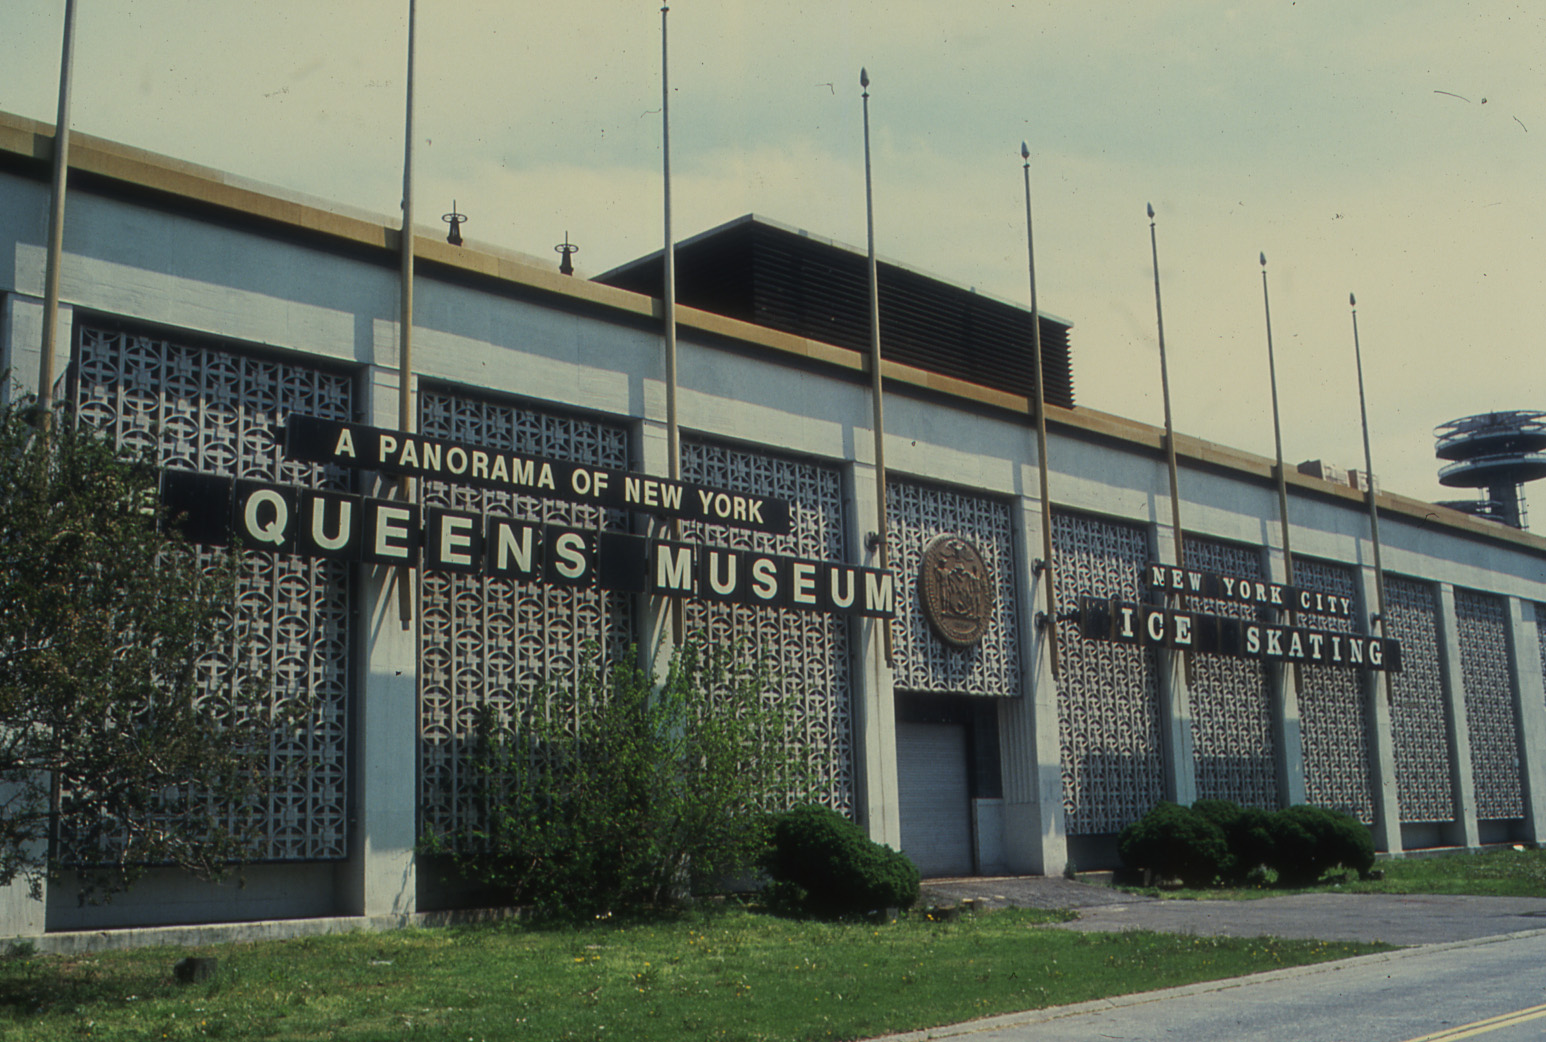 A colored film photo of the Queens Museum against a cloudy sky. The building is white with an intricate pattern on the facade. There are two sets of black building signs that read “A PANORAMA OF NEW YORK, QUEENS MUSEUM” and NEW YORK CITY ICE SKATING” in white, uppercase font.